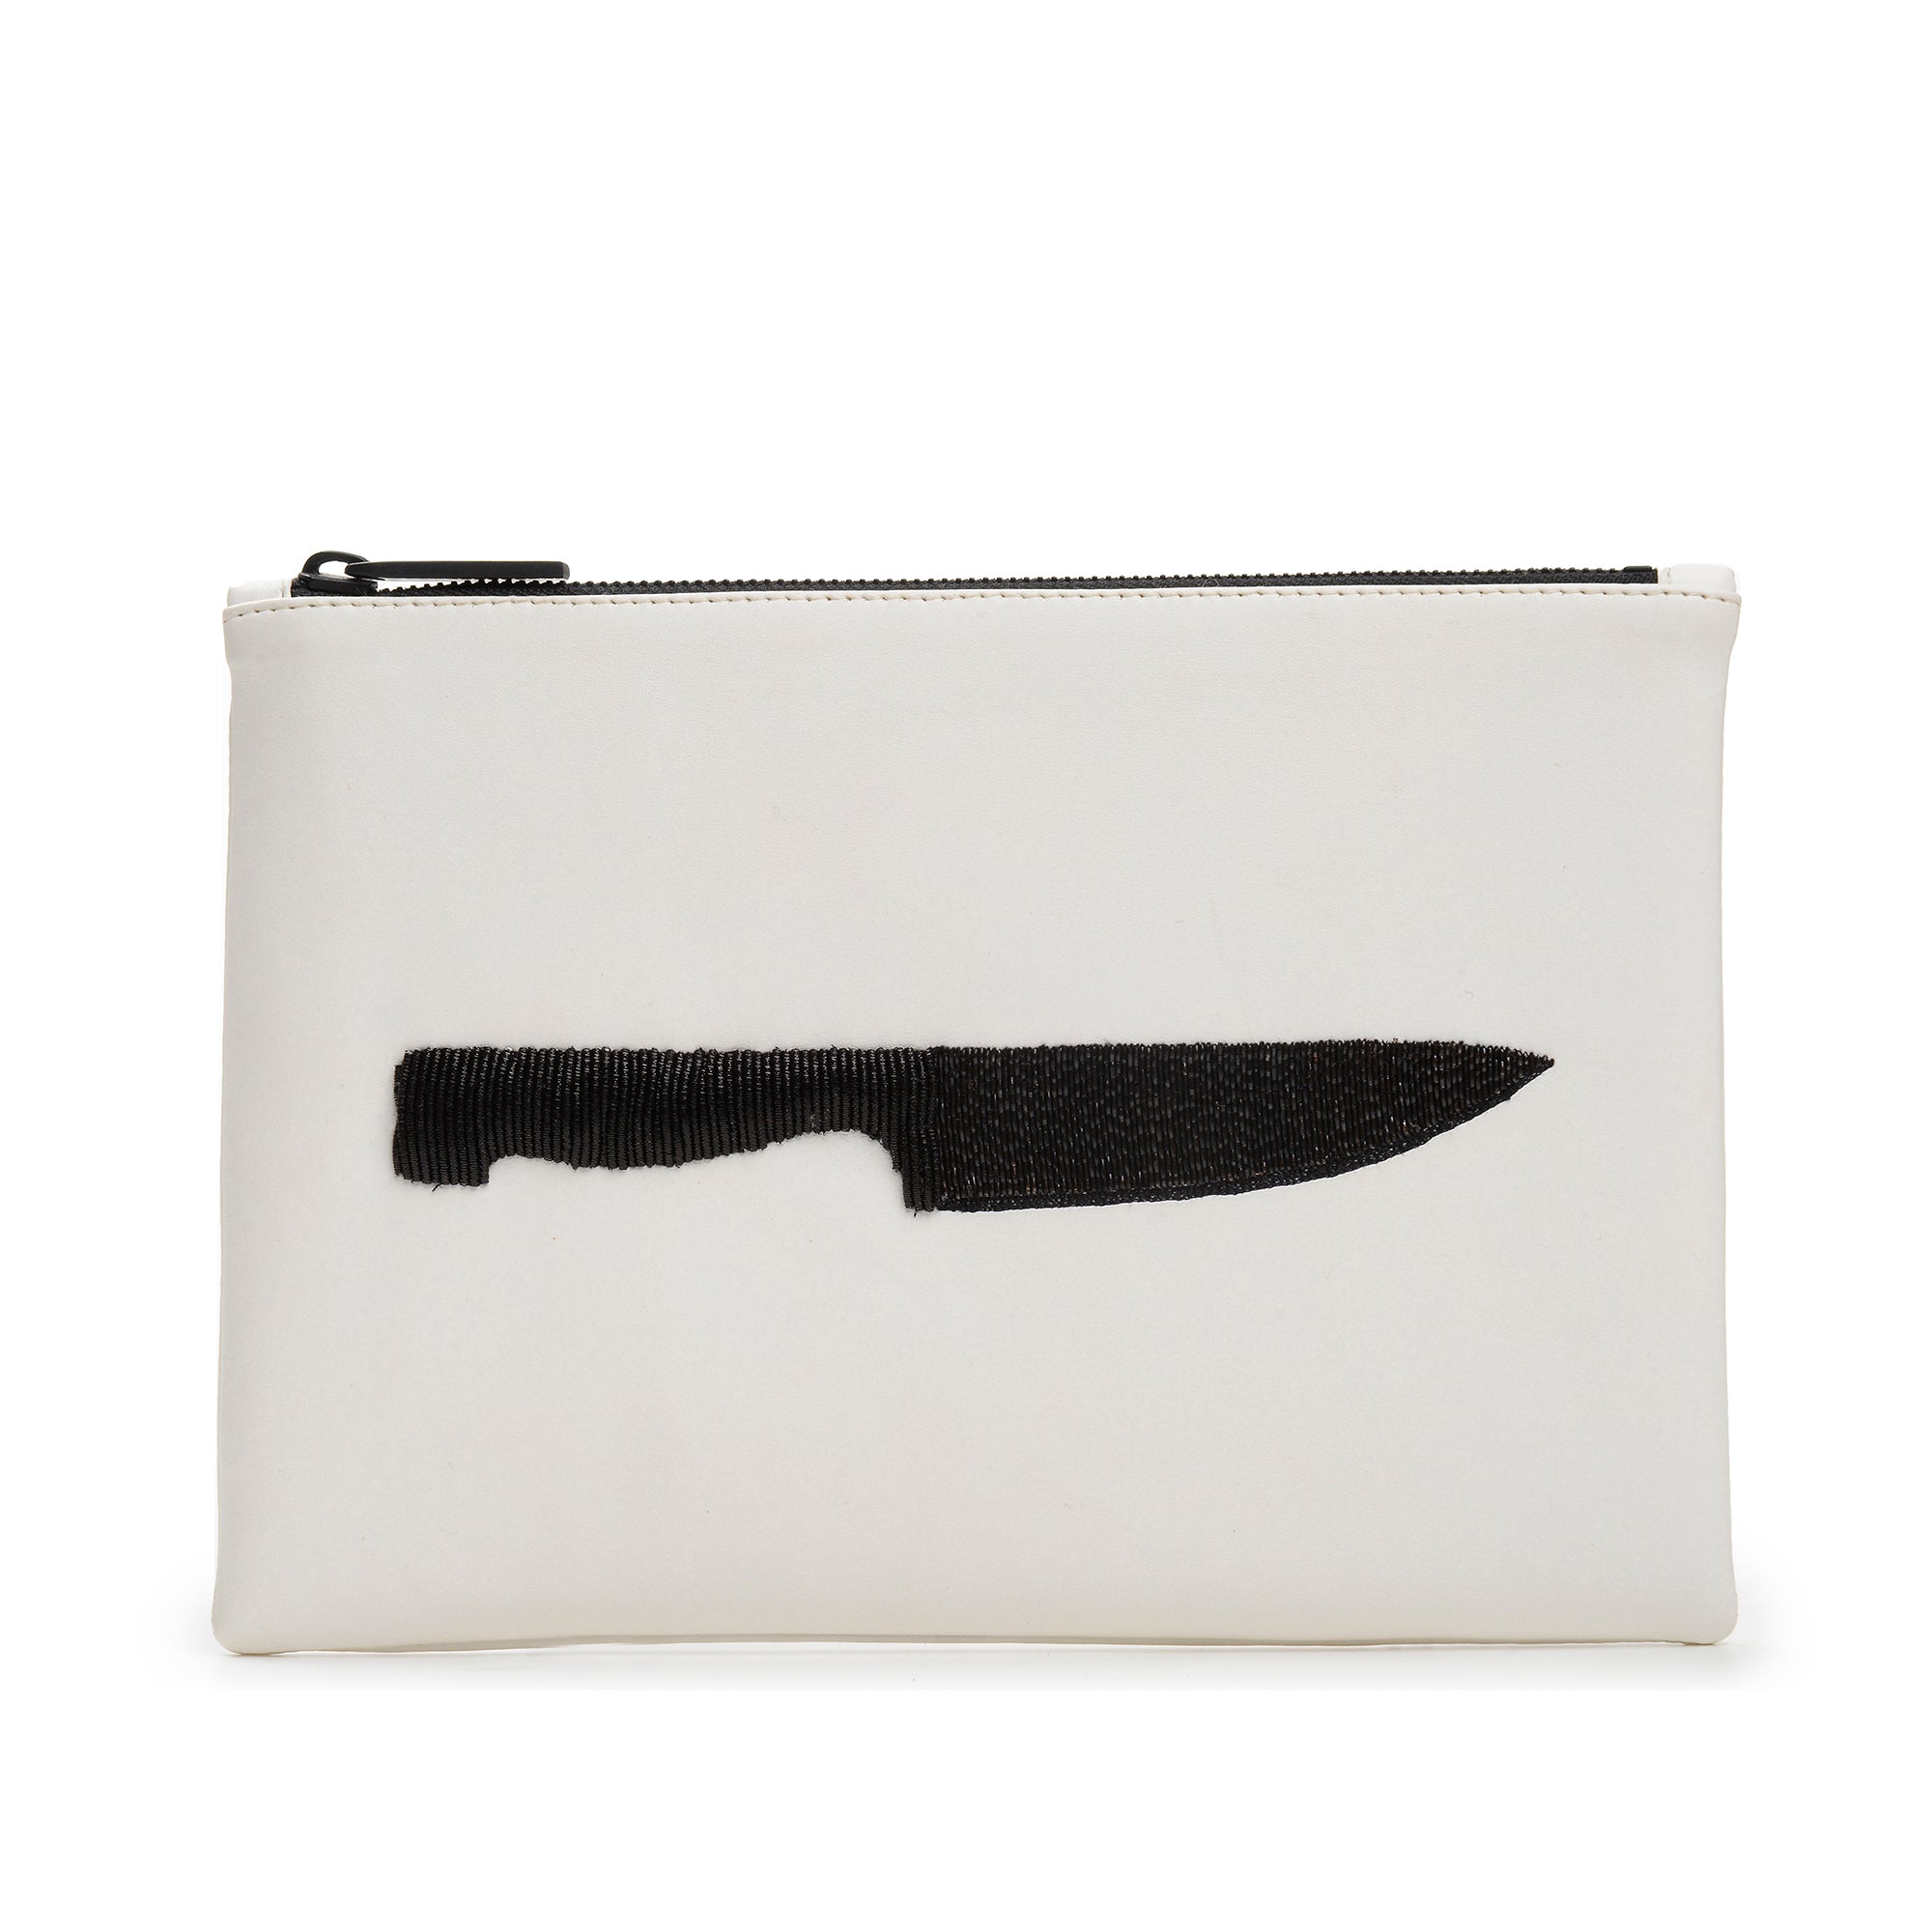 KNIFE EMBROIDERED CLUTCH BAG